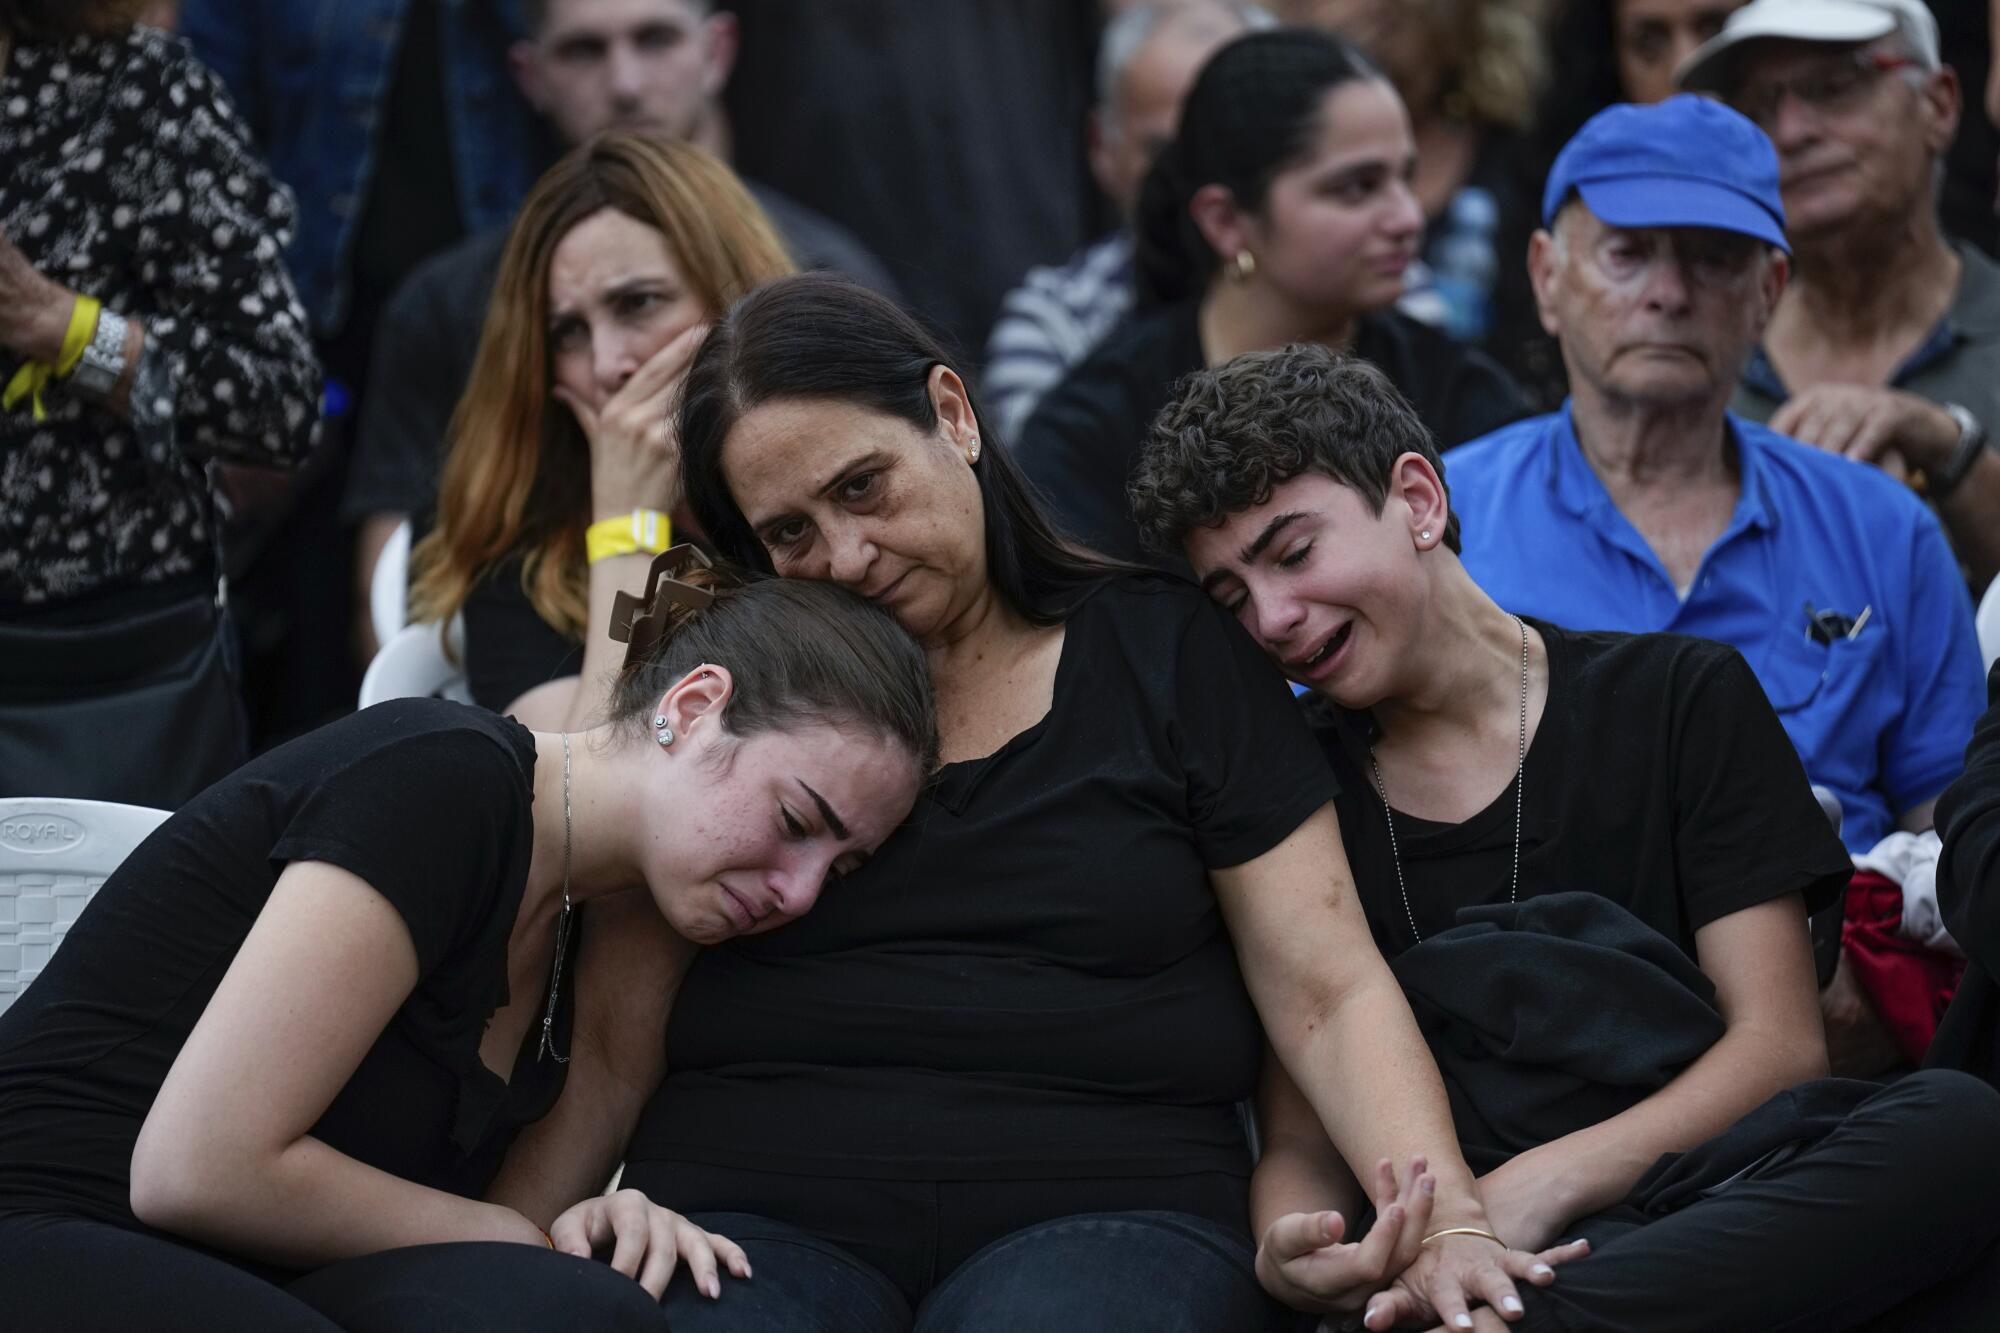 A woman wearing black is flanked by a young woman, left and a young man, both wearing black and crying, near other people